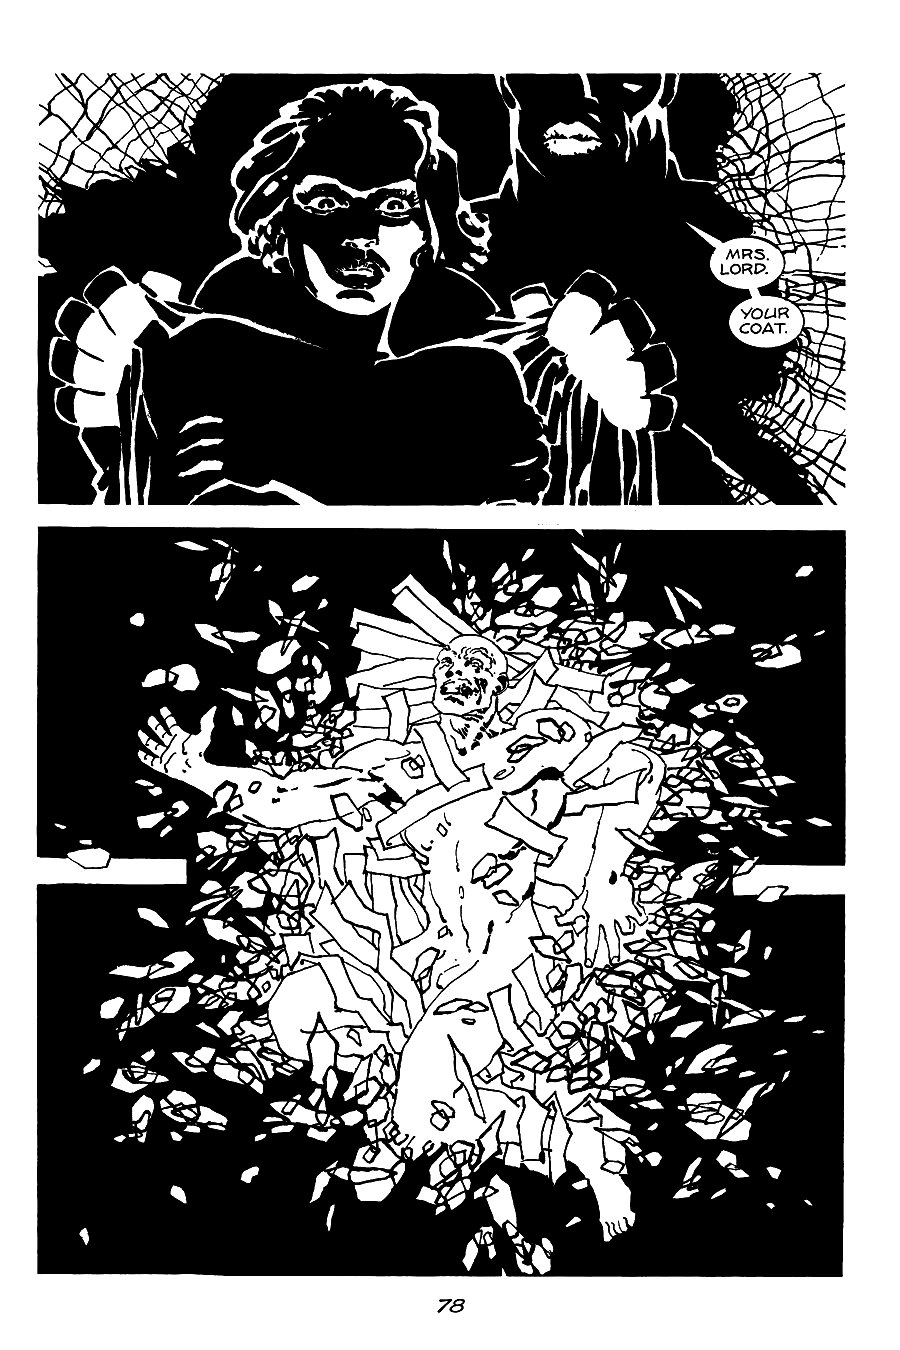 page 78 of sin city 2 the hard goodbye